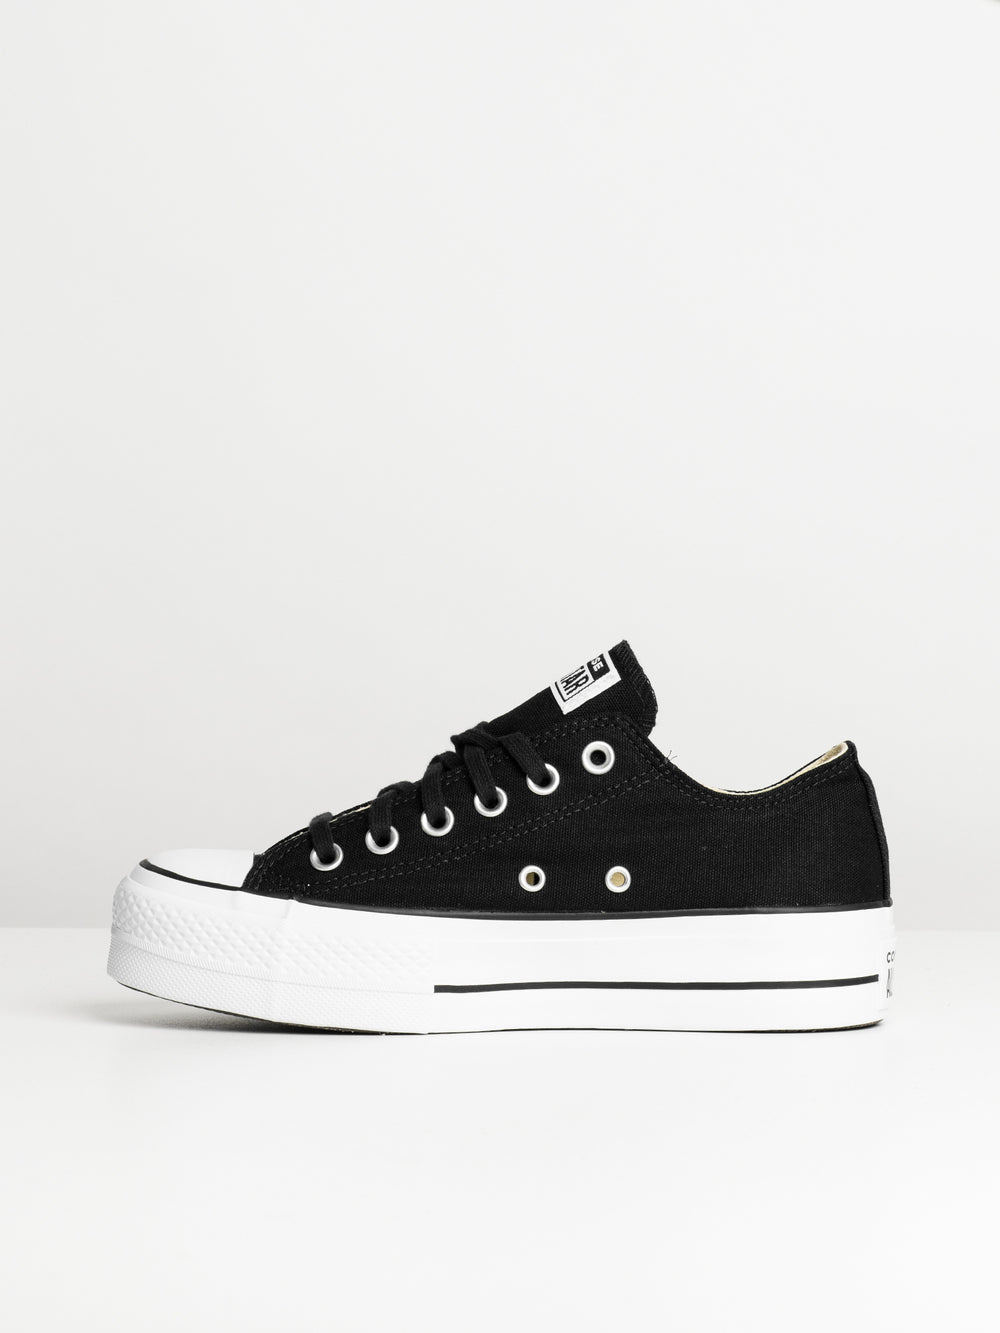 WOMENS CONVERSE CHUCK TAYLOR ALL STAR LIFT SHOES